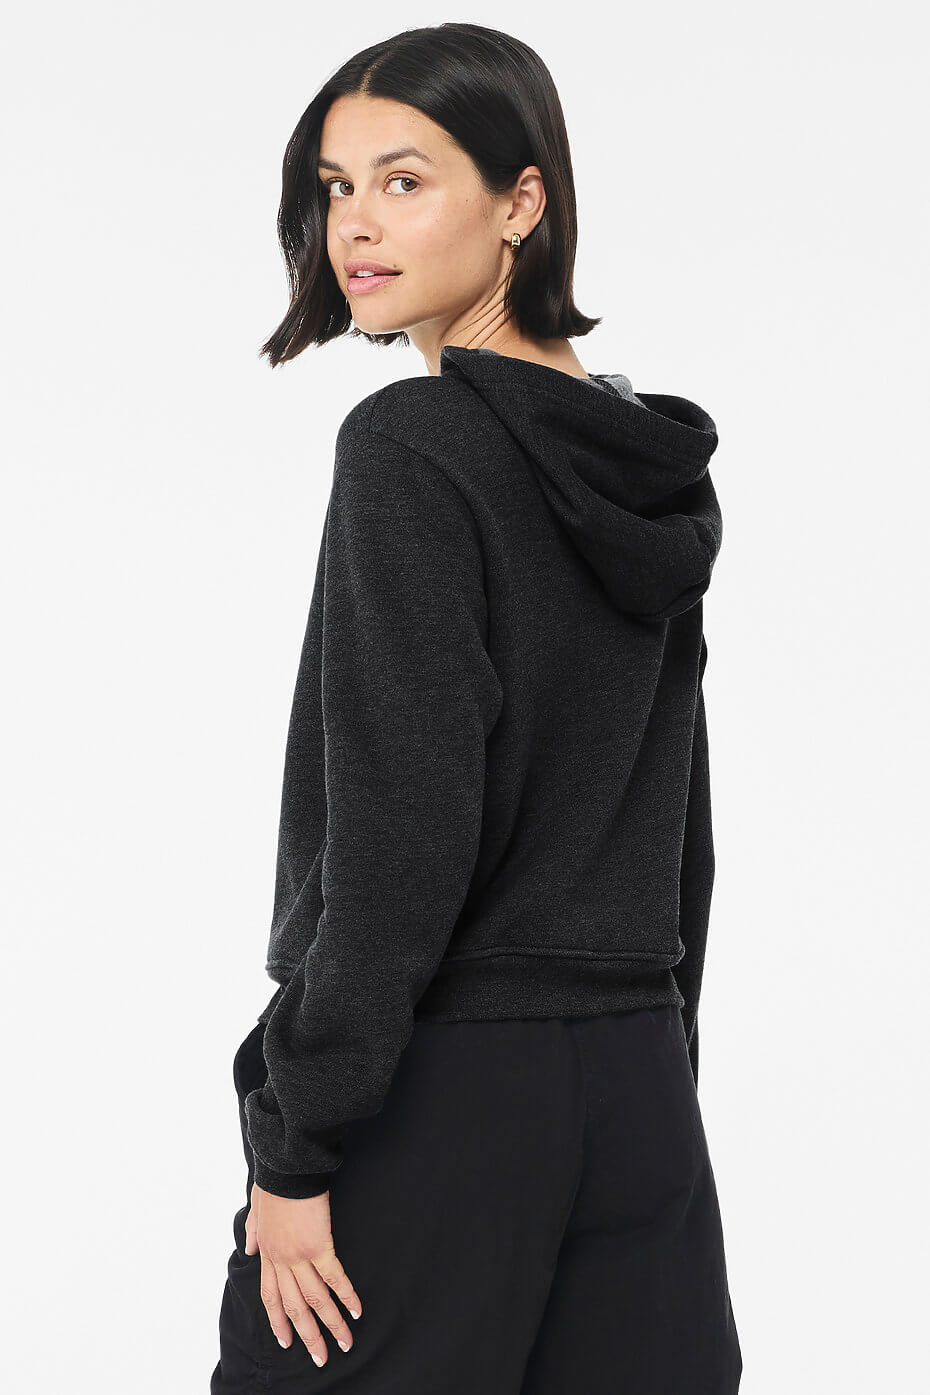 WOMEN'S CLASSIC PULLOVER HOODIE